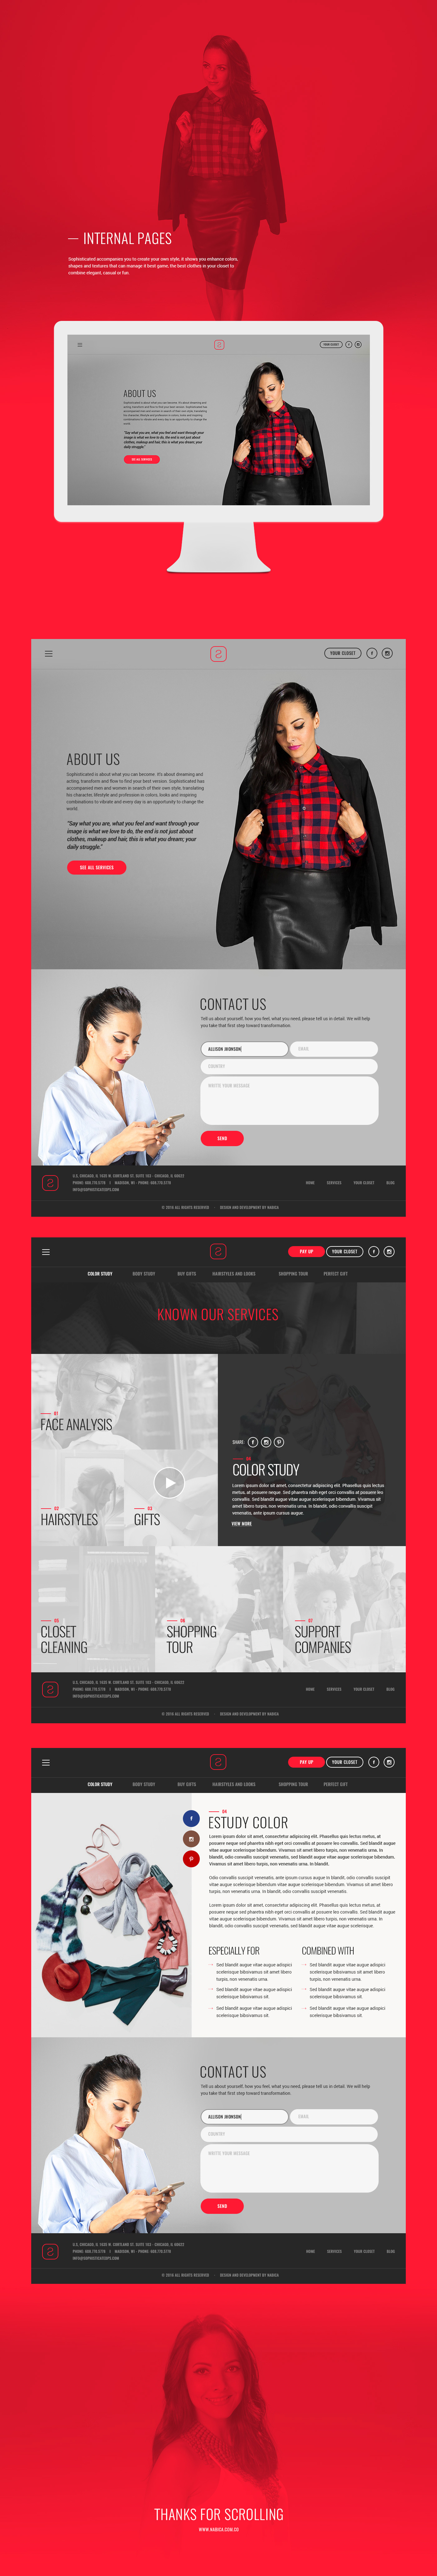 personal shopper flat clean minimal onepage HTML parallax luxury services shoppping personal page consultant woman gray black